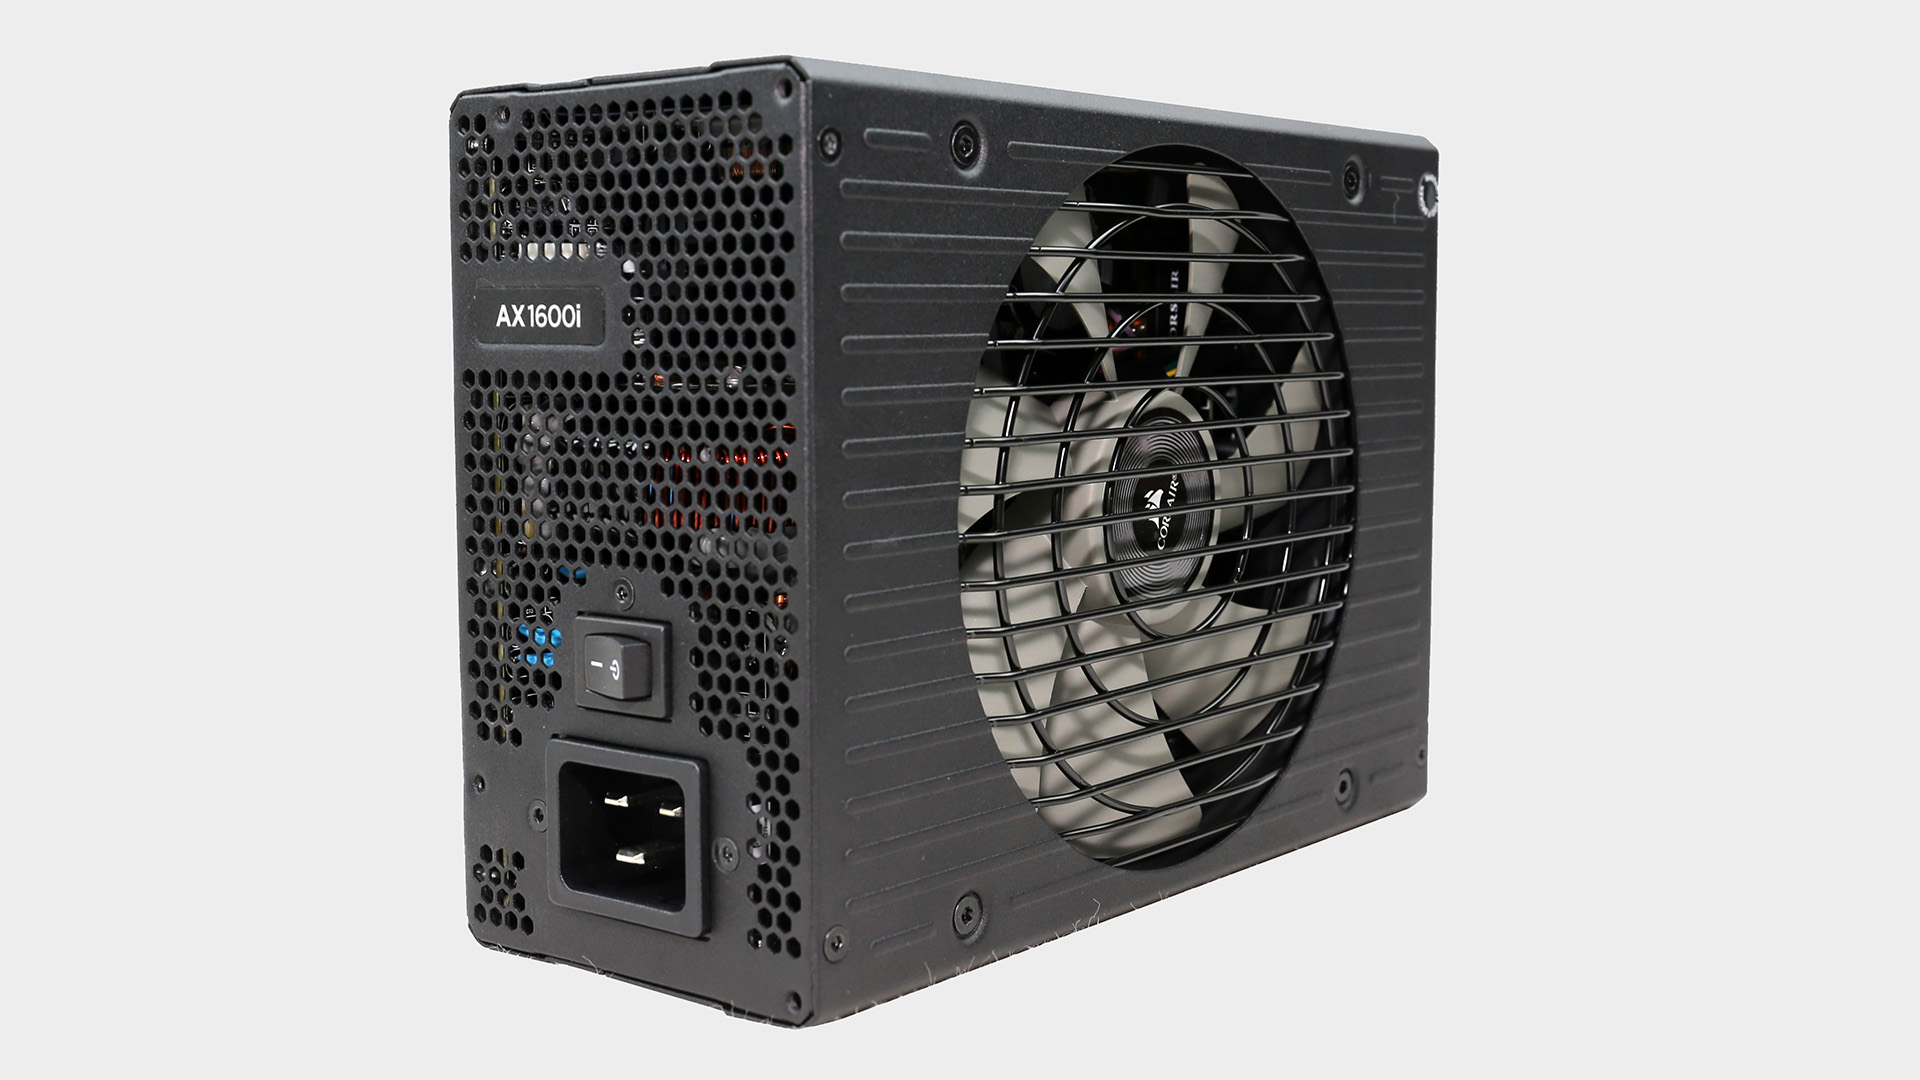 Corsair AX1600i power supply with cables.